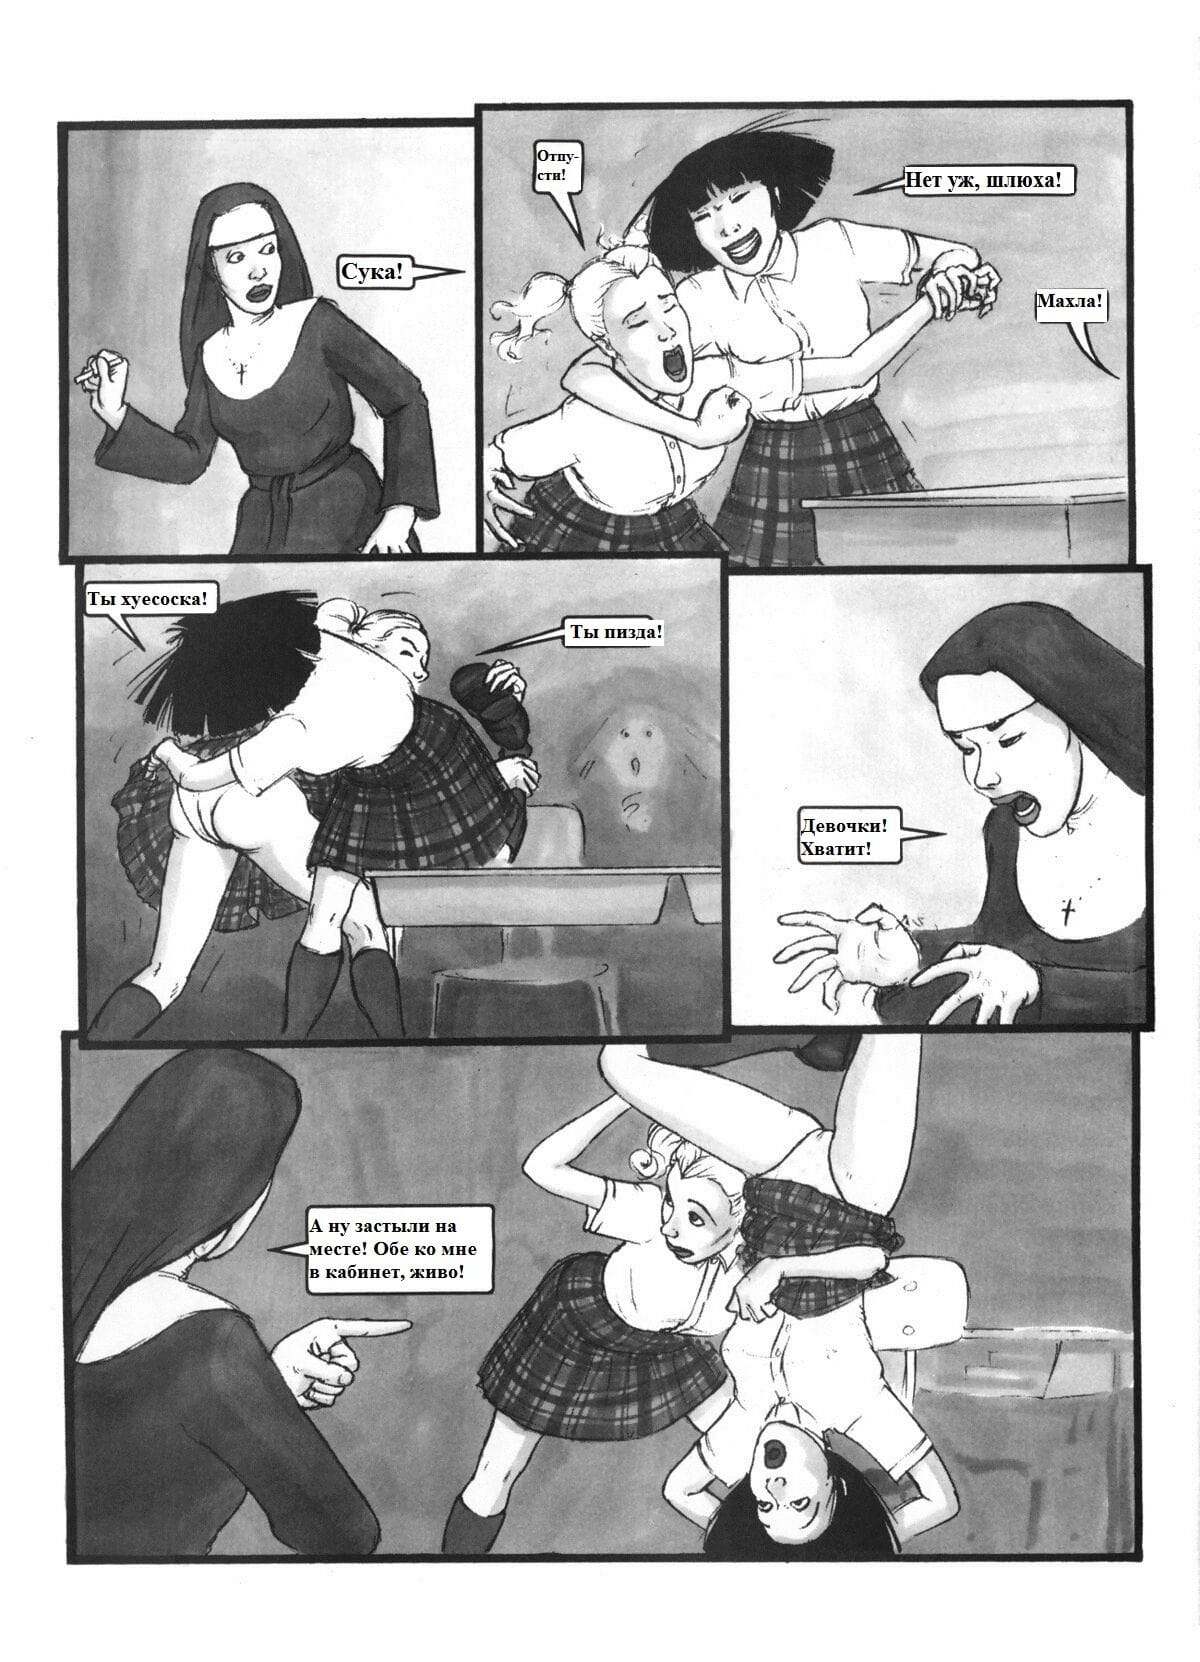 The adventures of a lesbian college school girl - part 2 page 1